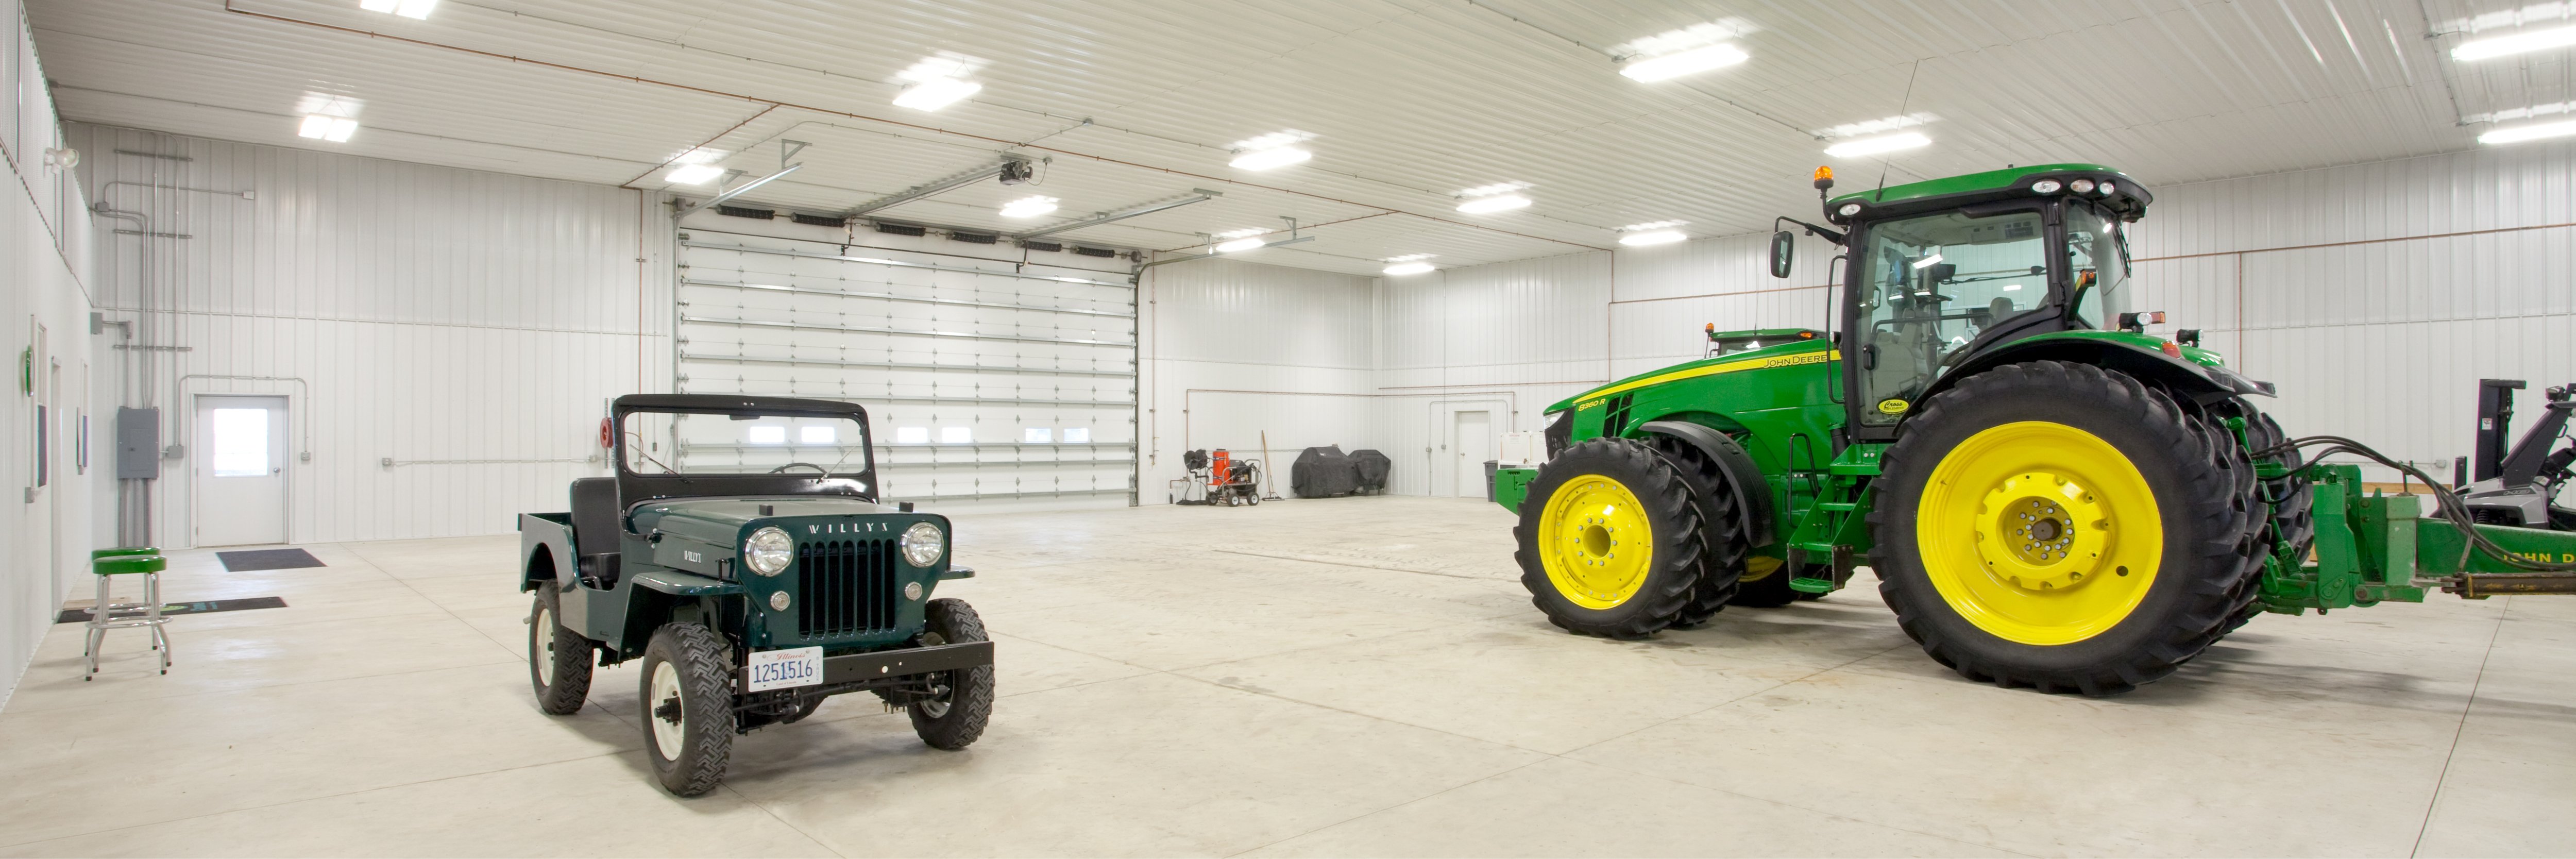 7 Types of Lighting to Put Inside Your Pole Barn